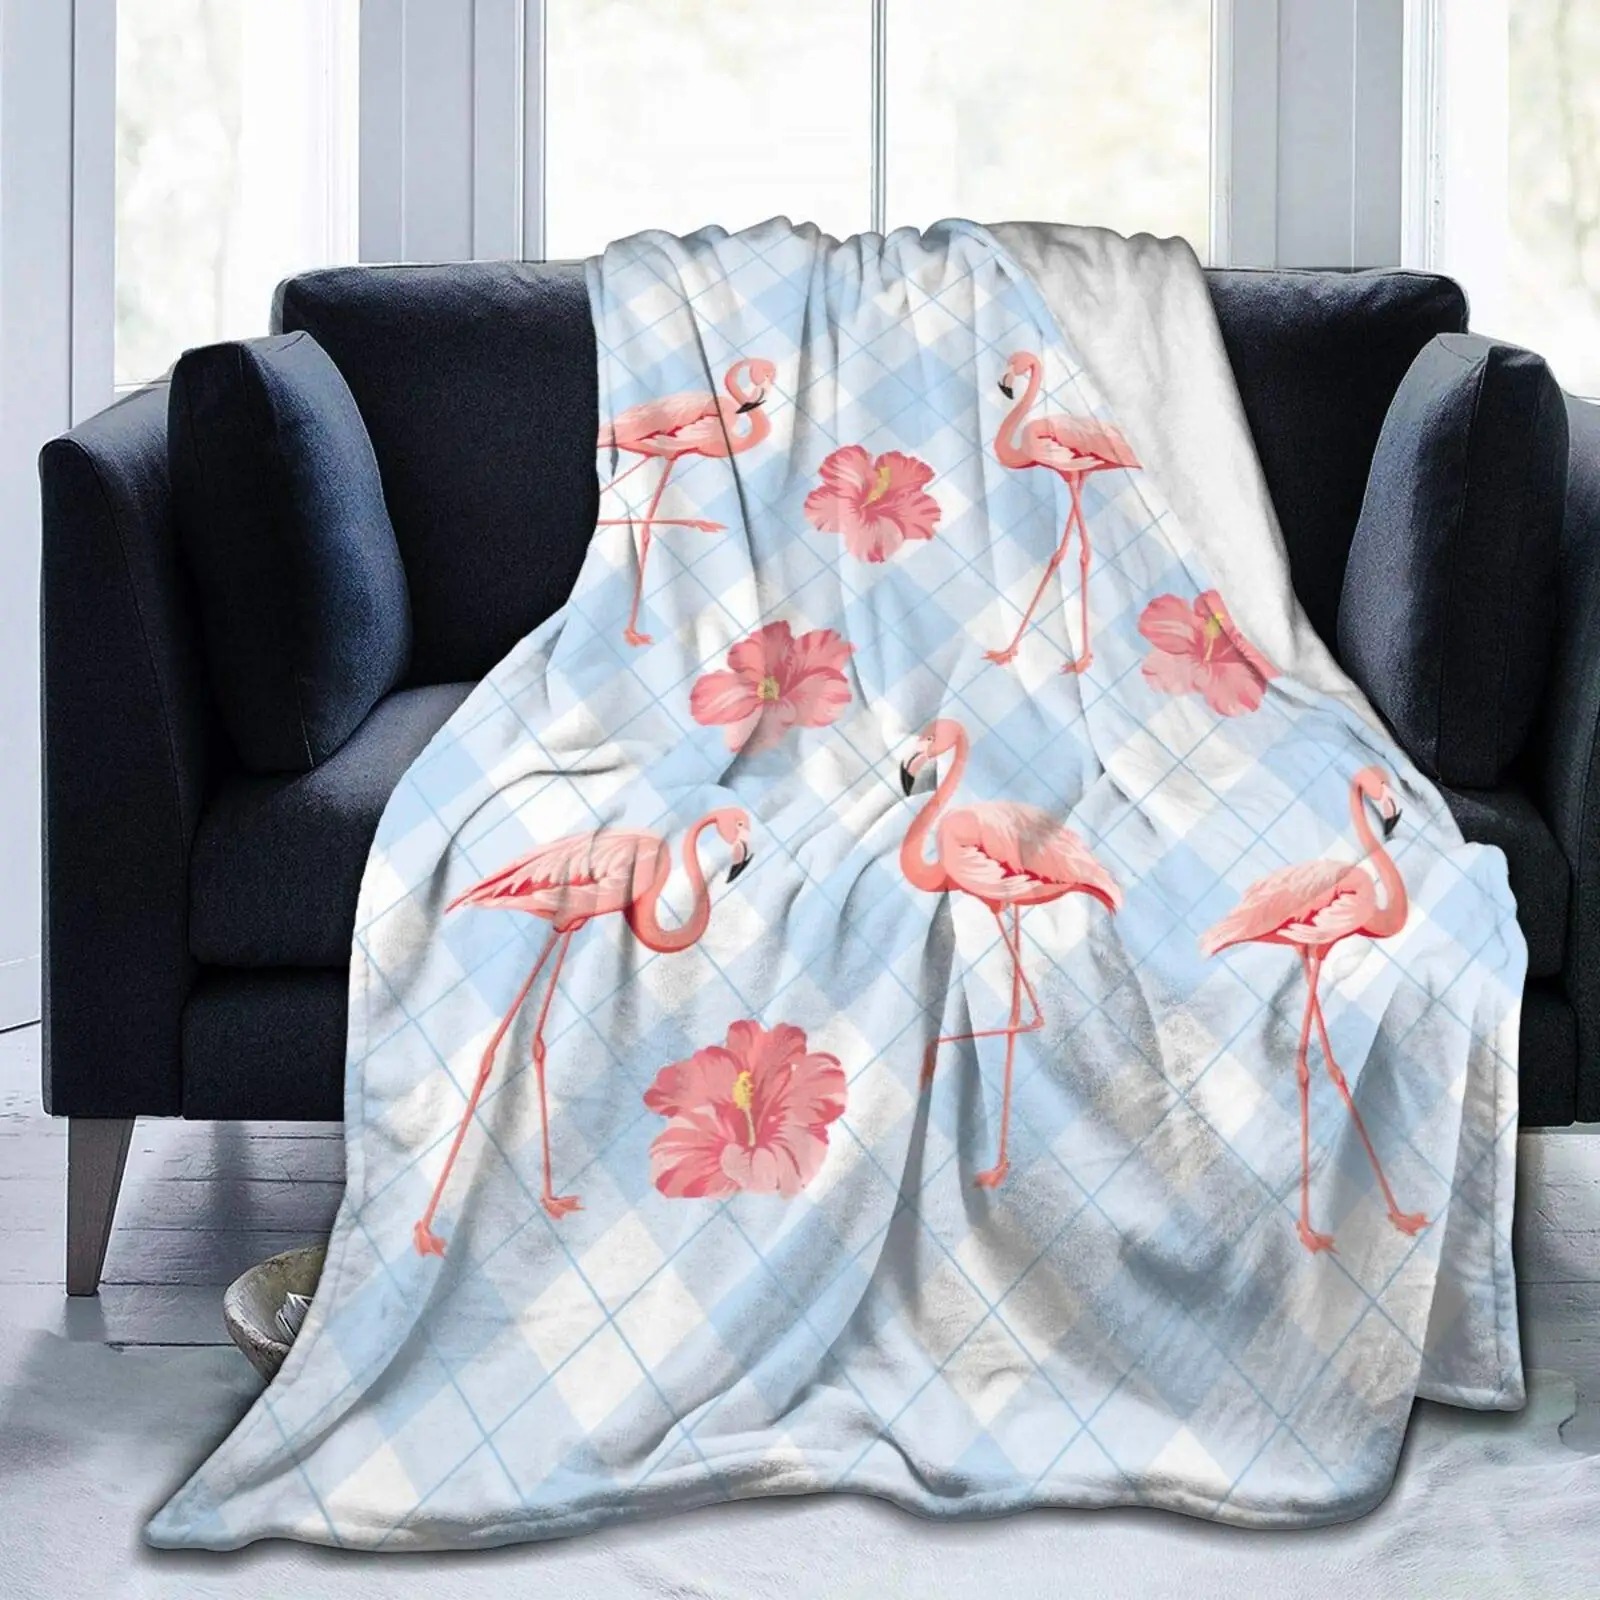 

Pink Flamingo Blanket Flannel Throw Blanket Ultra Soft Micro Fleece Blanket Bed Couch Living Room 150x220cm for Adults